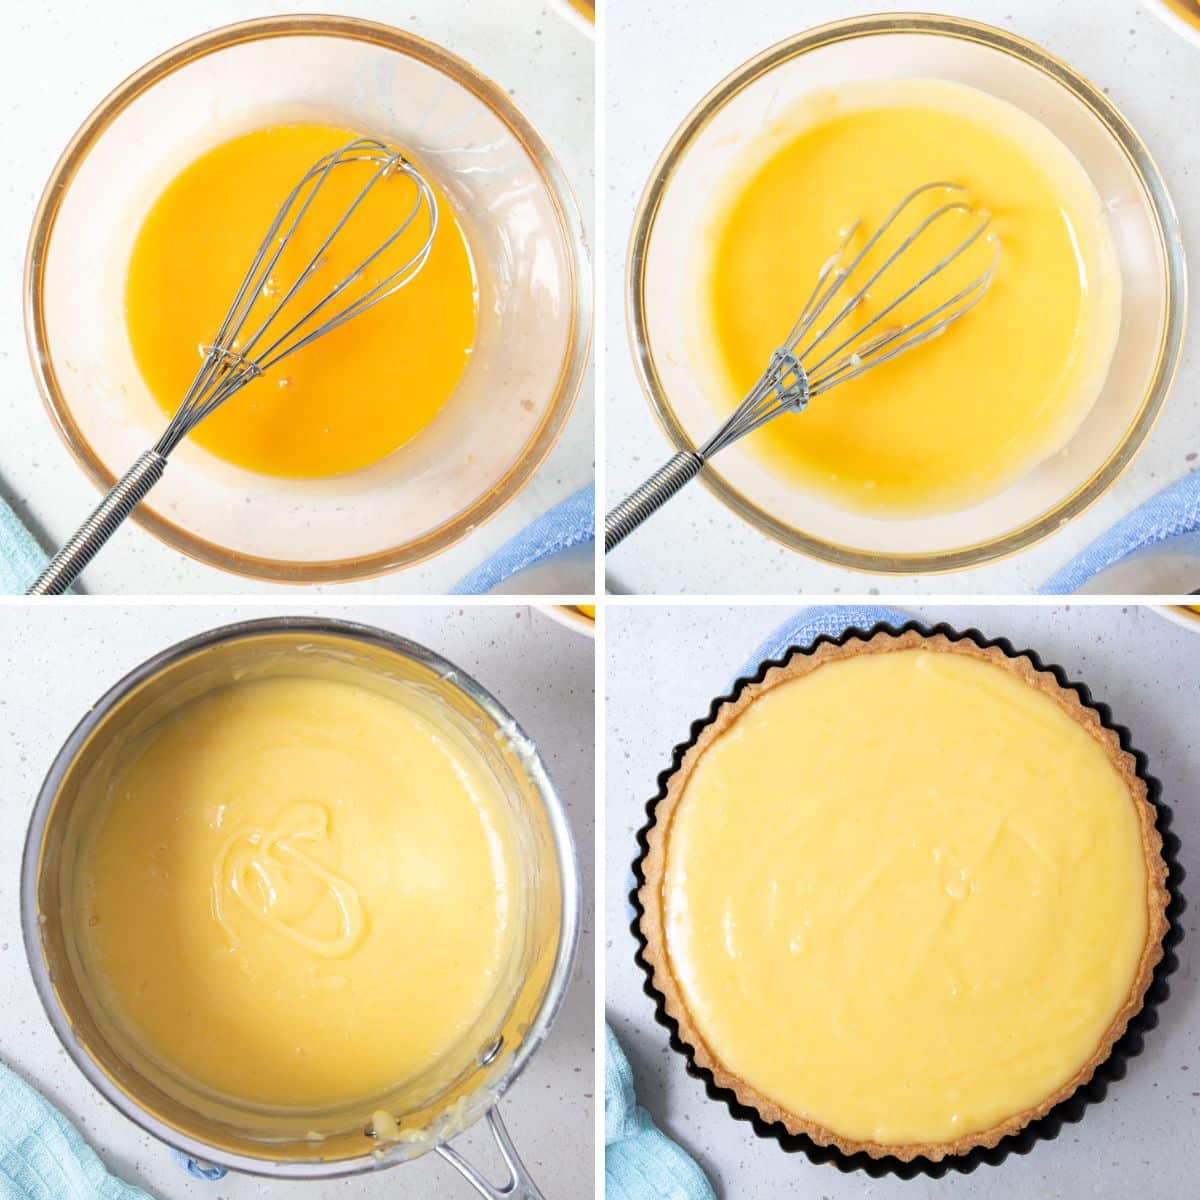 egg yolks in a bowl and finished lemon filling, poured into a pastry case.